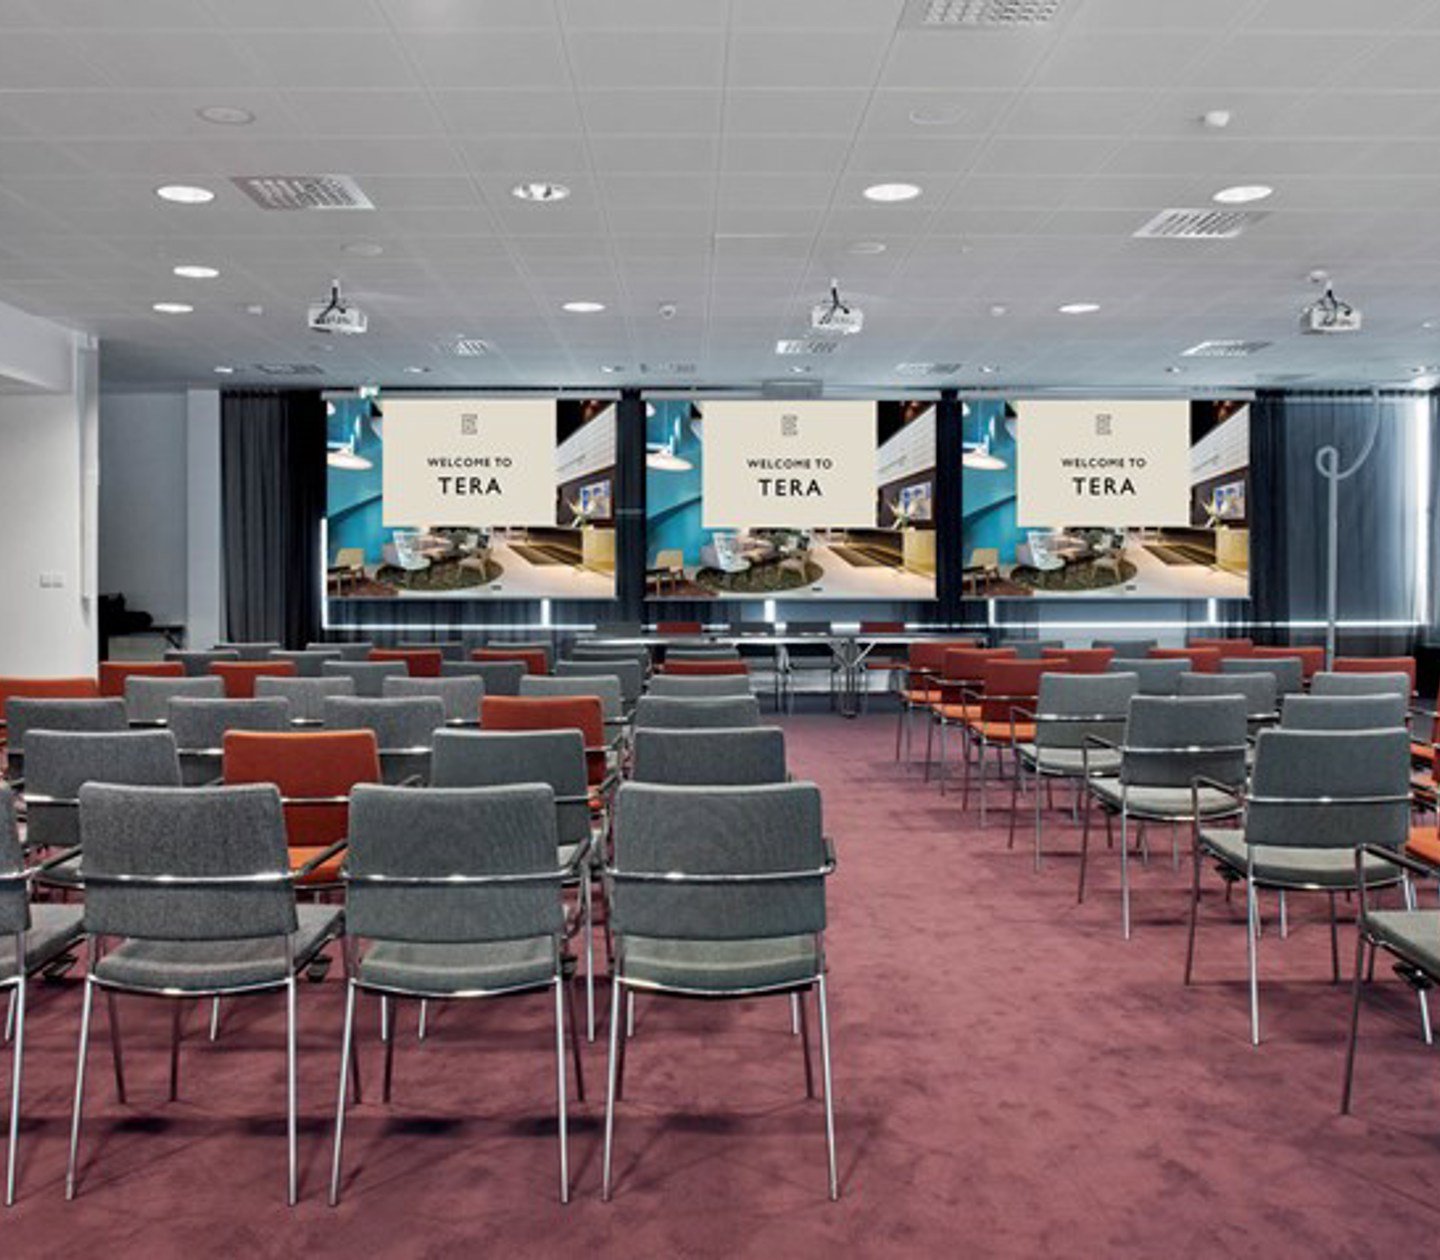 Conference room with chairs lined up in cinema seating